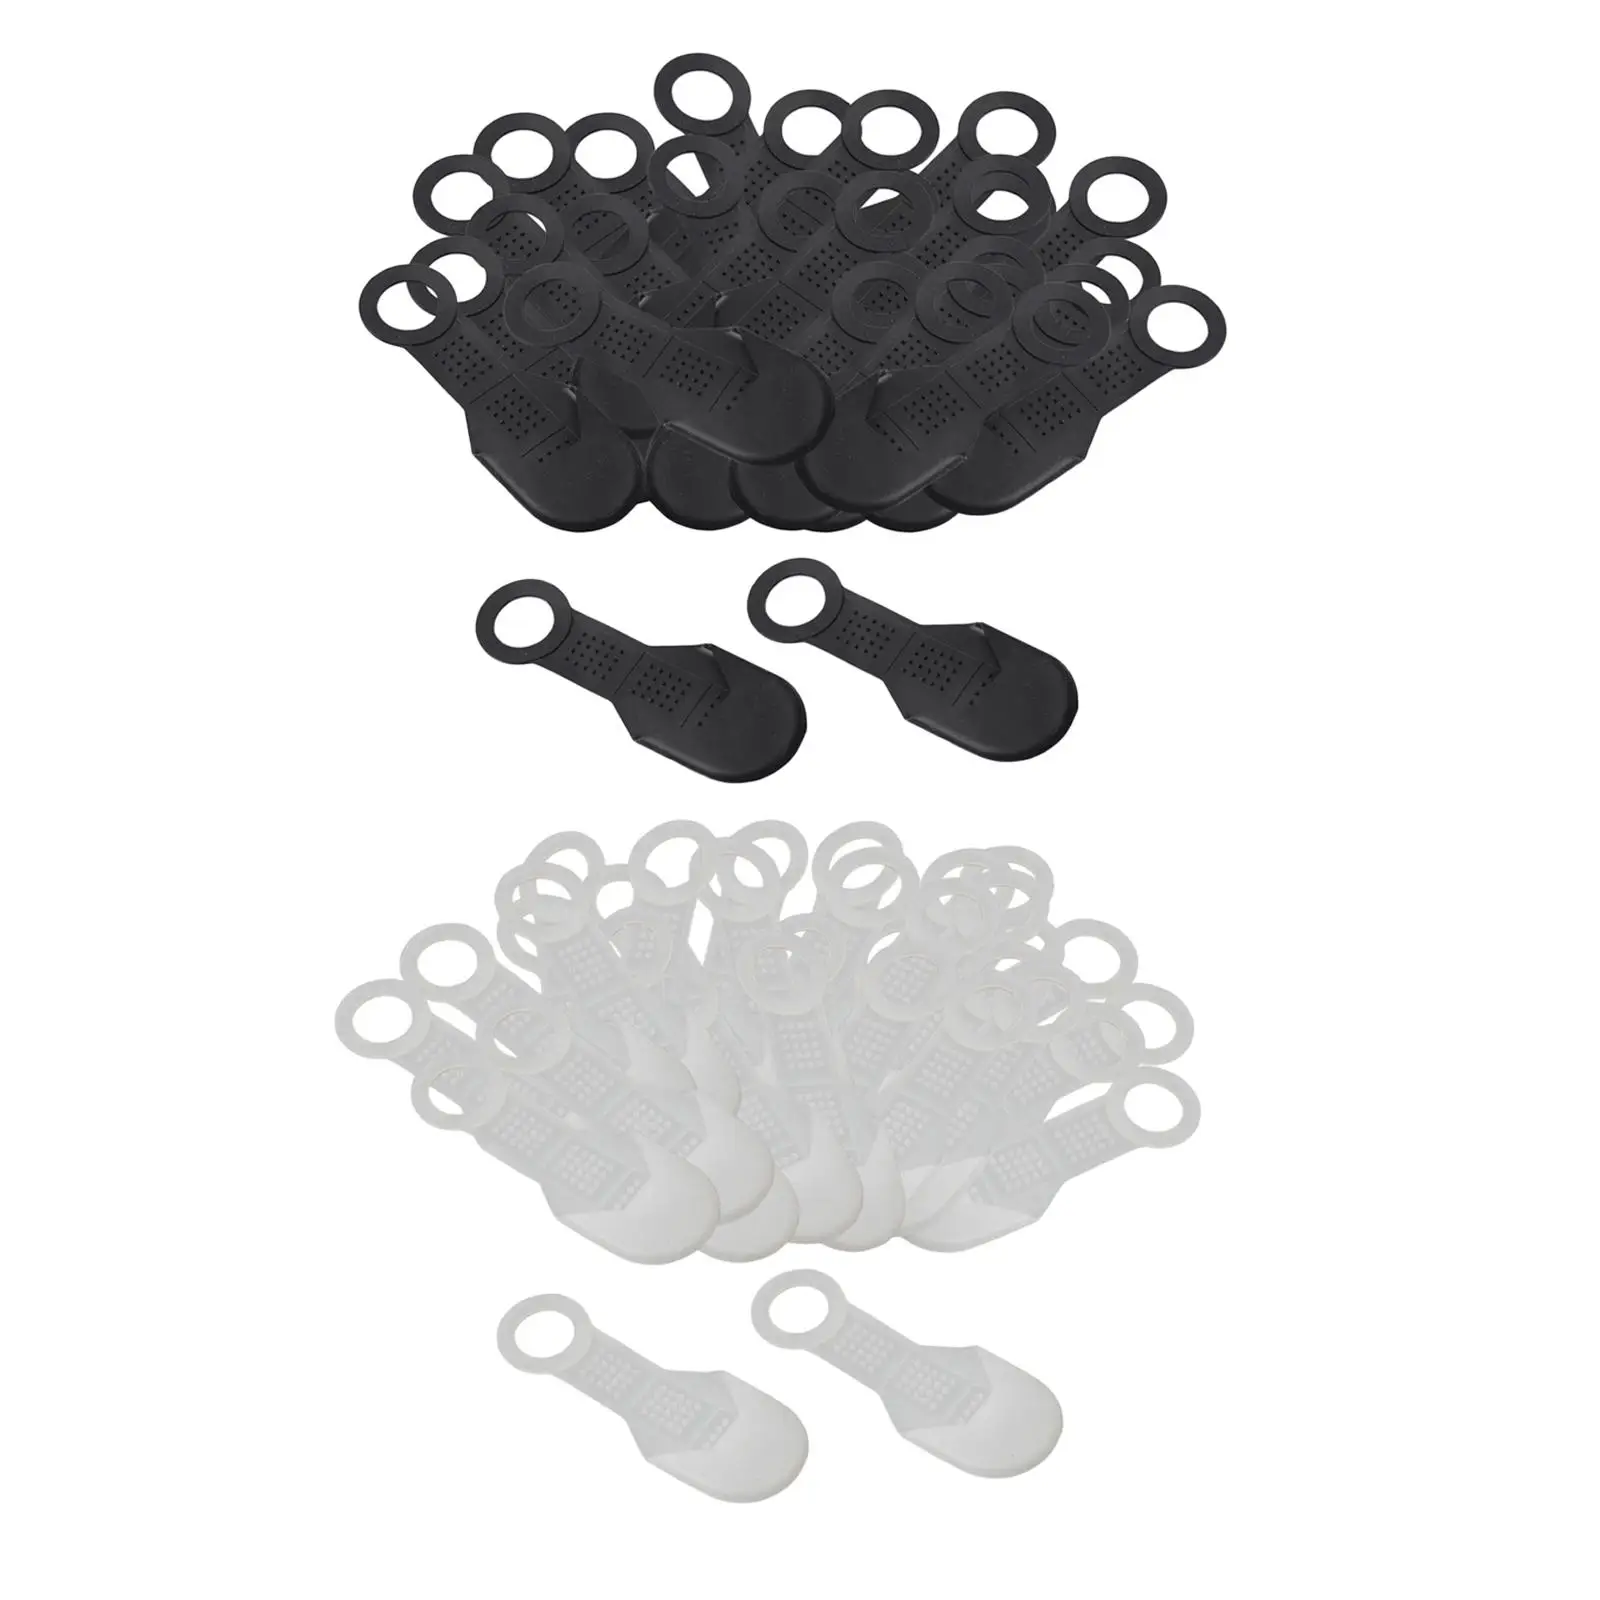 50Pcs Small Non Slip Pad for Clothes Hanger for Hanging Clothes Grippers